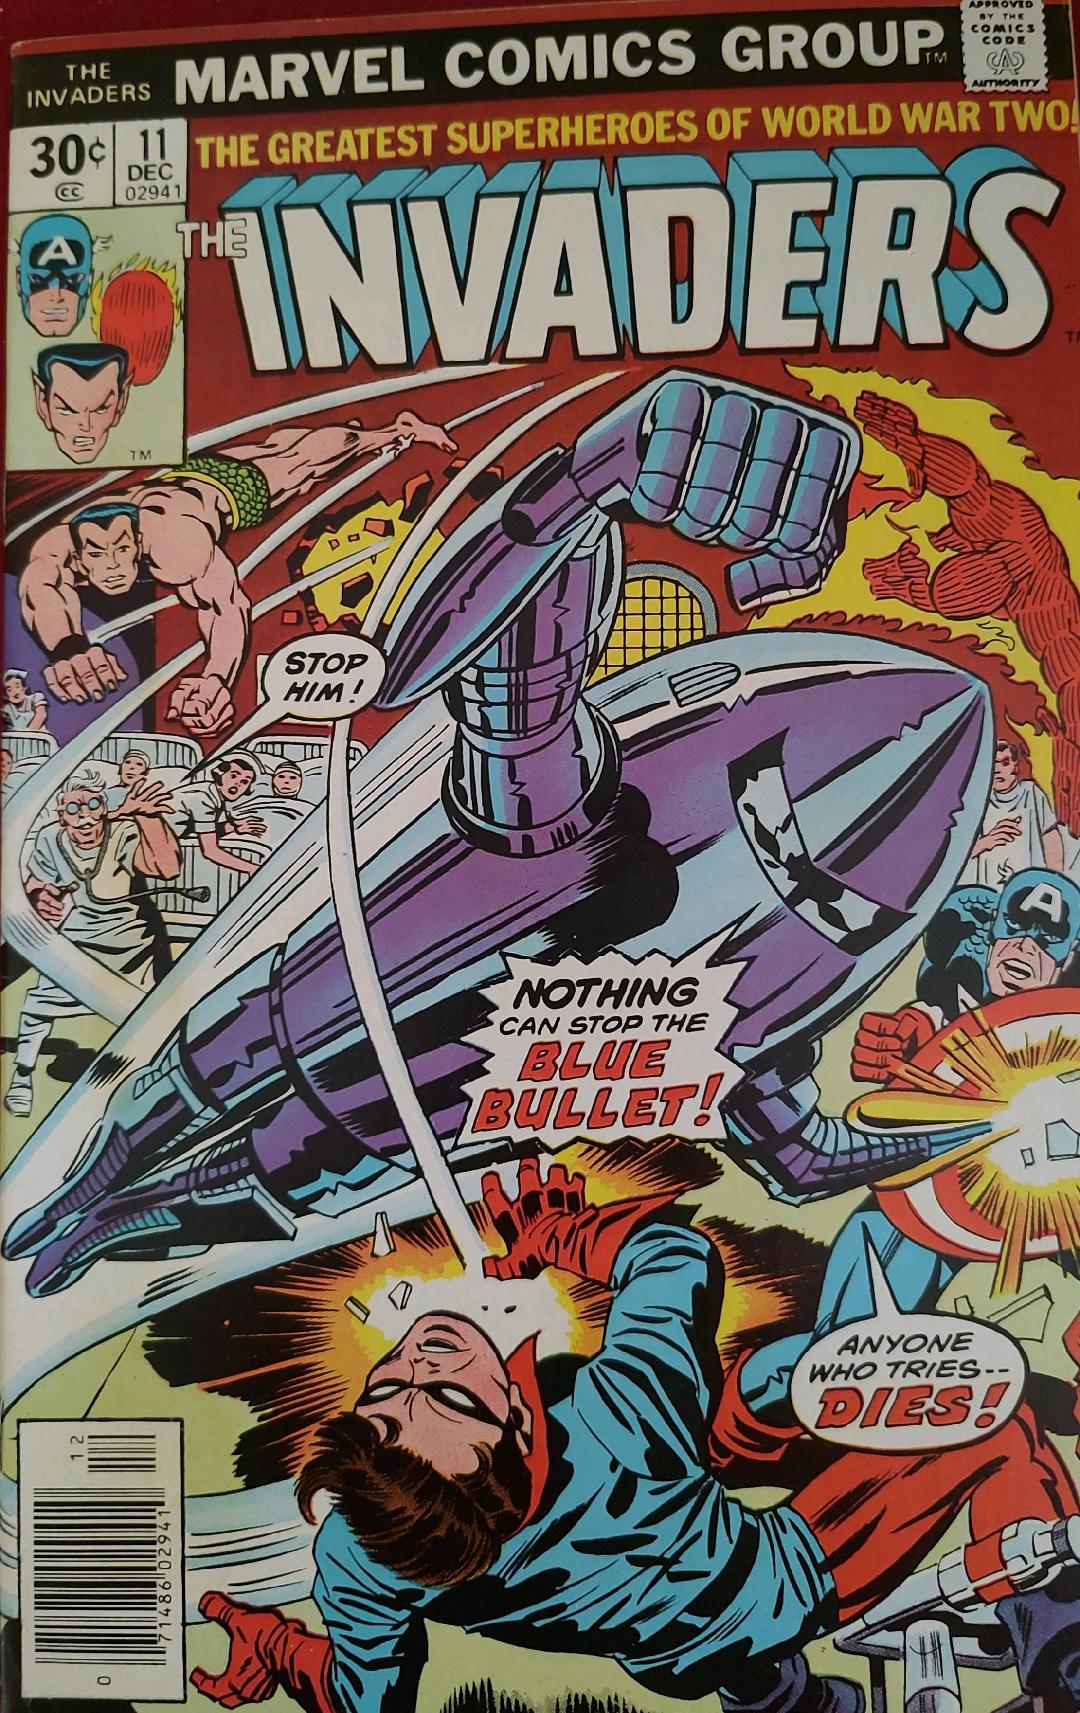 The Invaders #11 Comic Book Cover